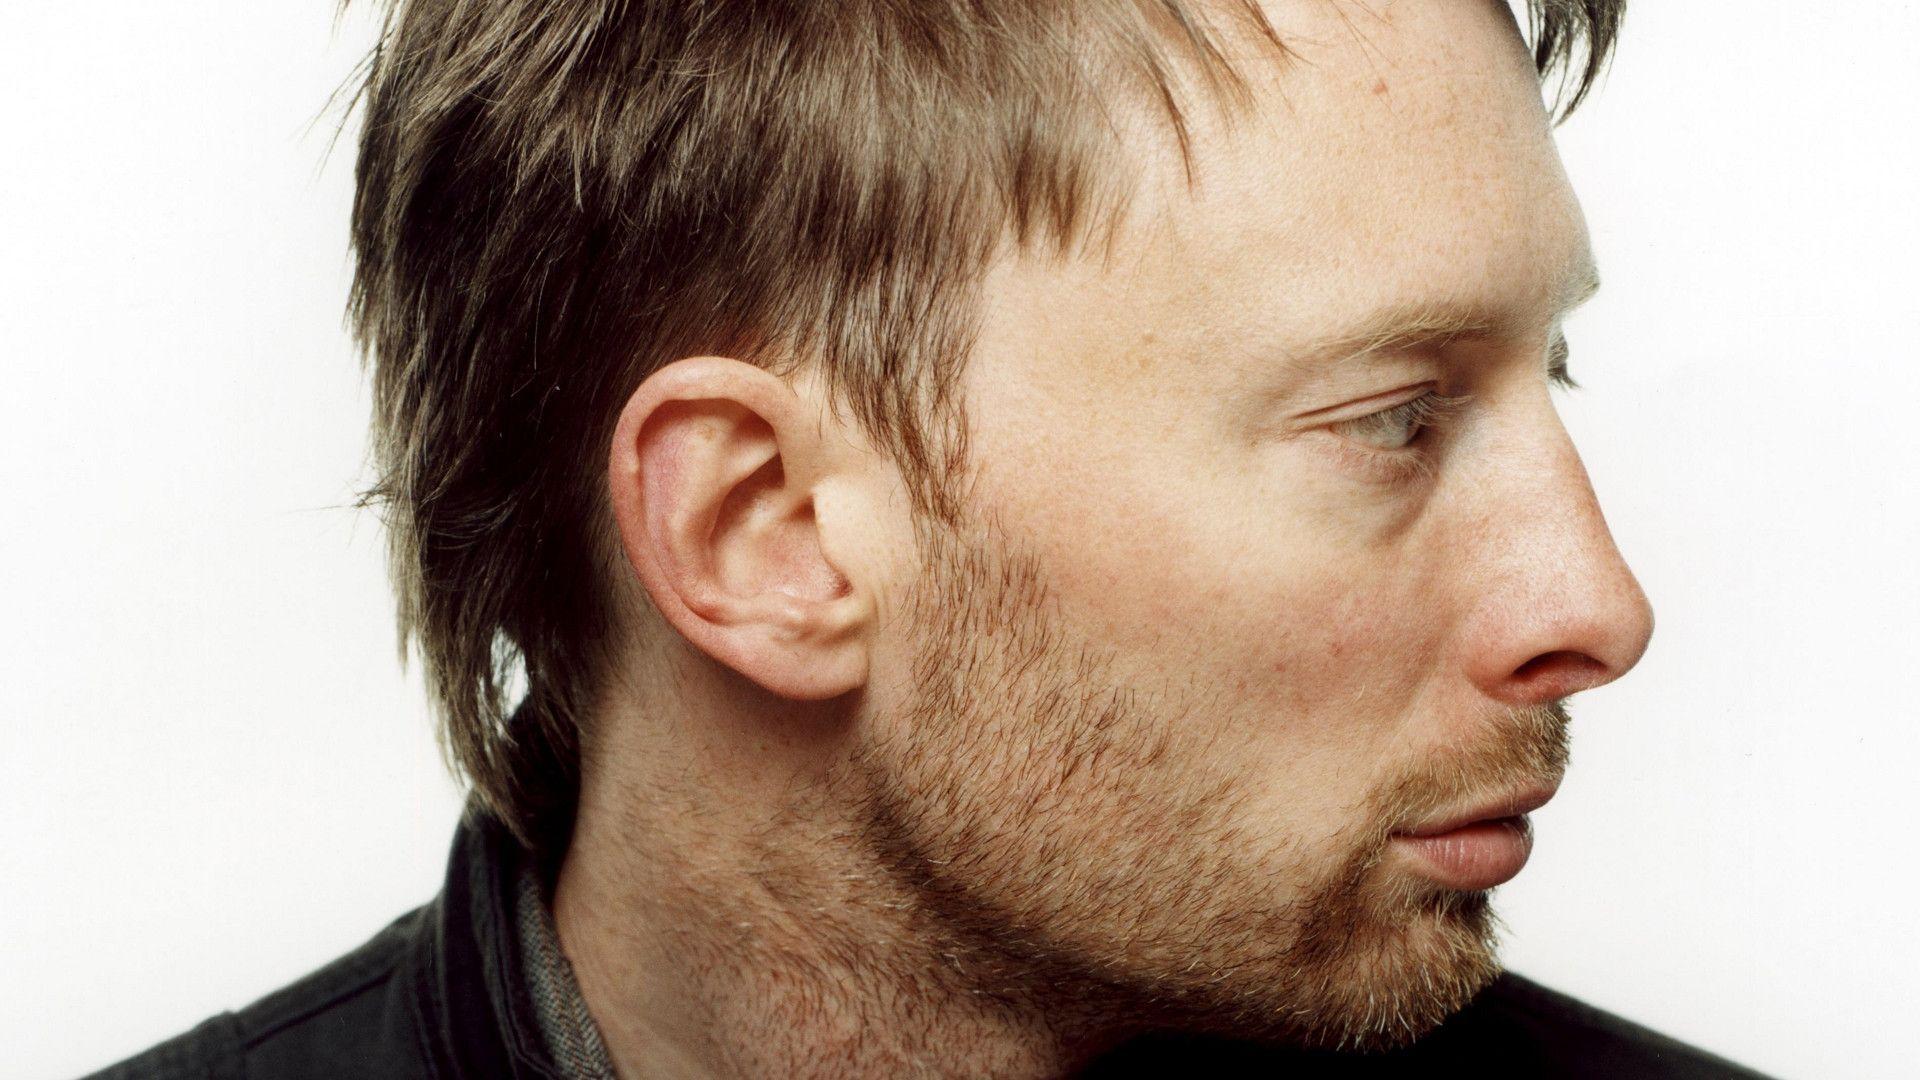 Thom Yorke Could Have Made $20 Million Releasing on Bittorrent